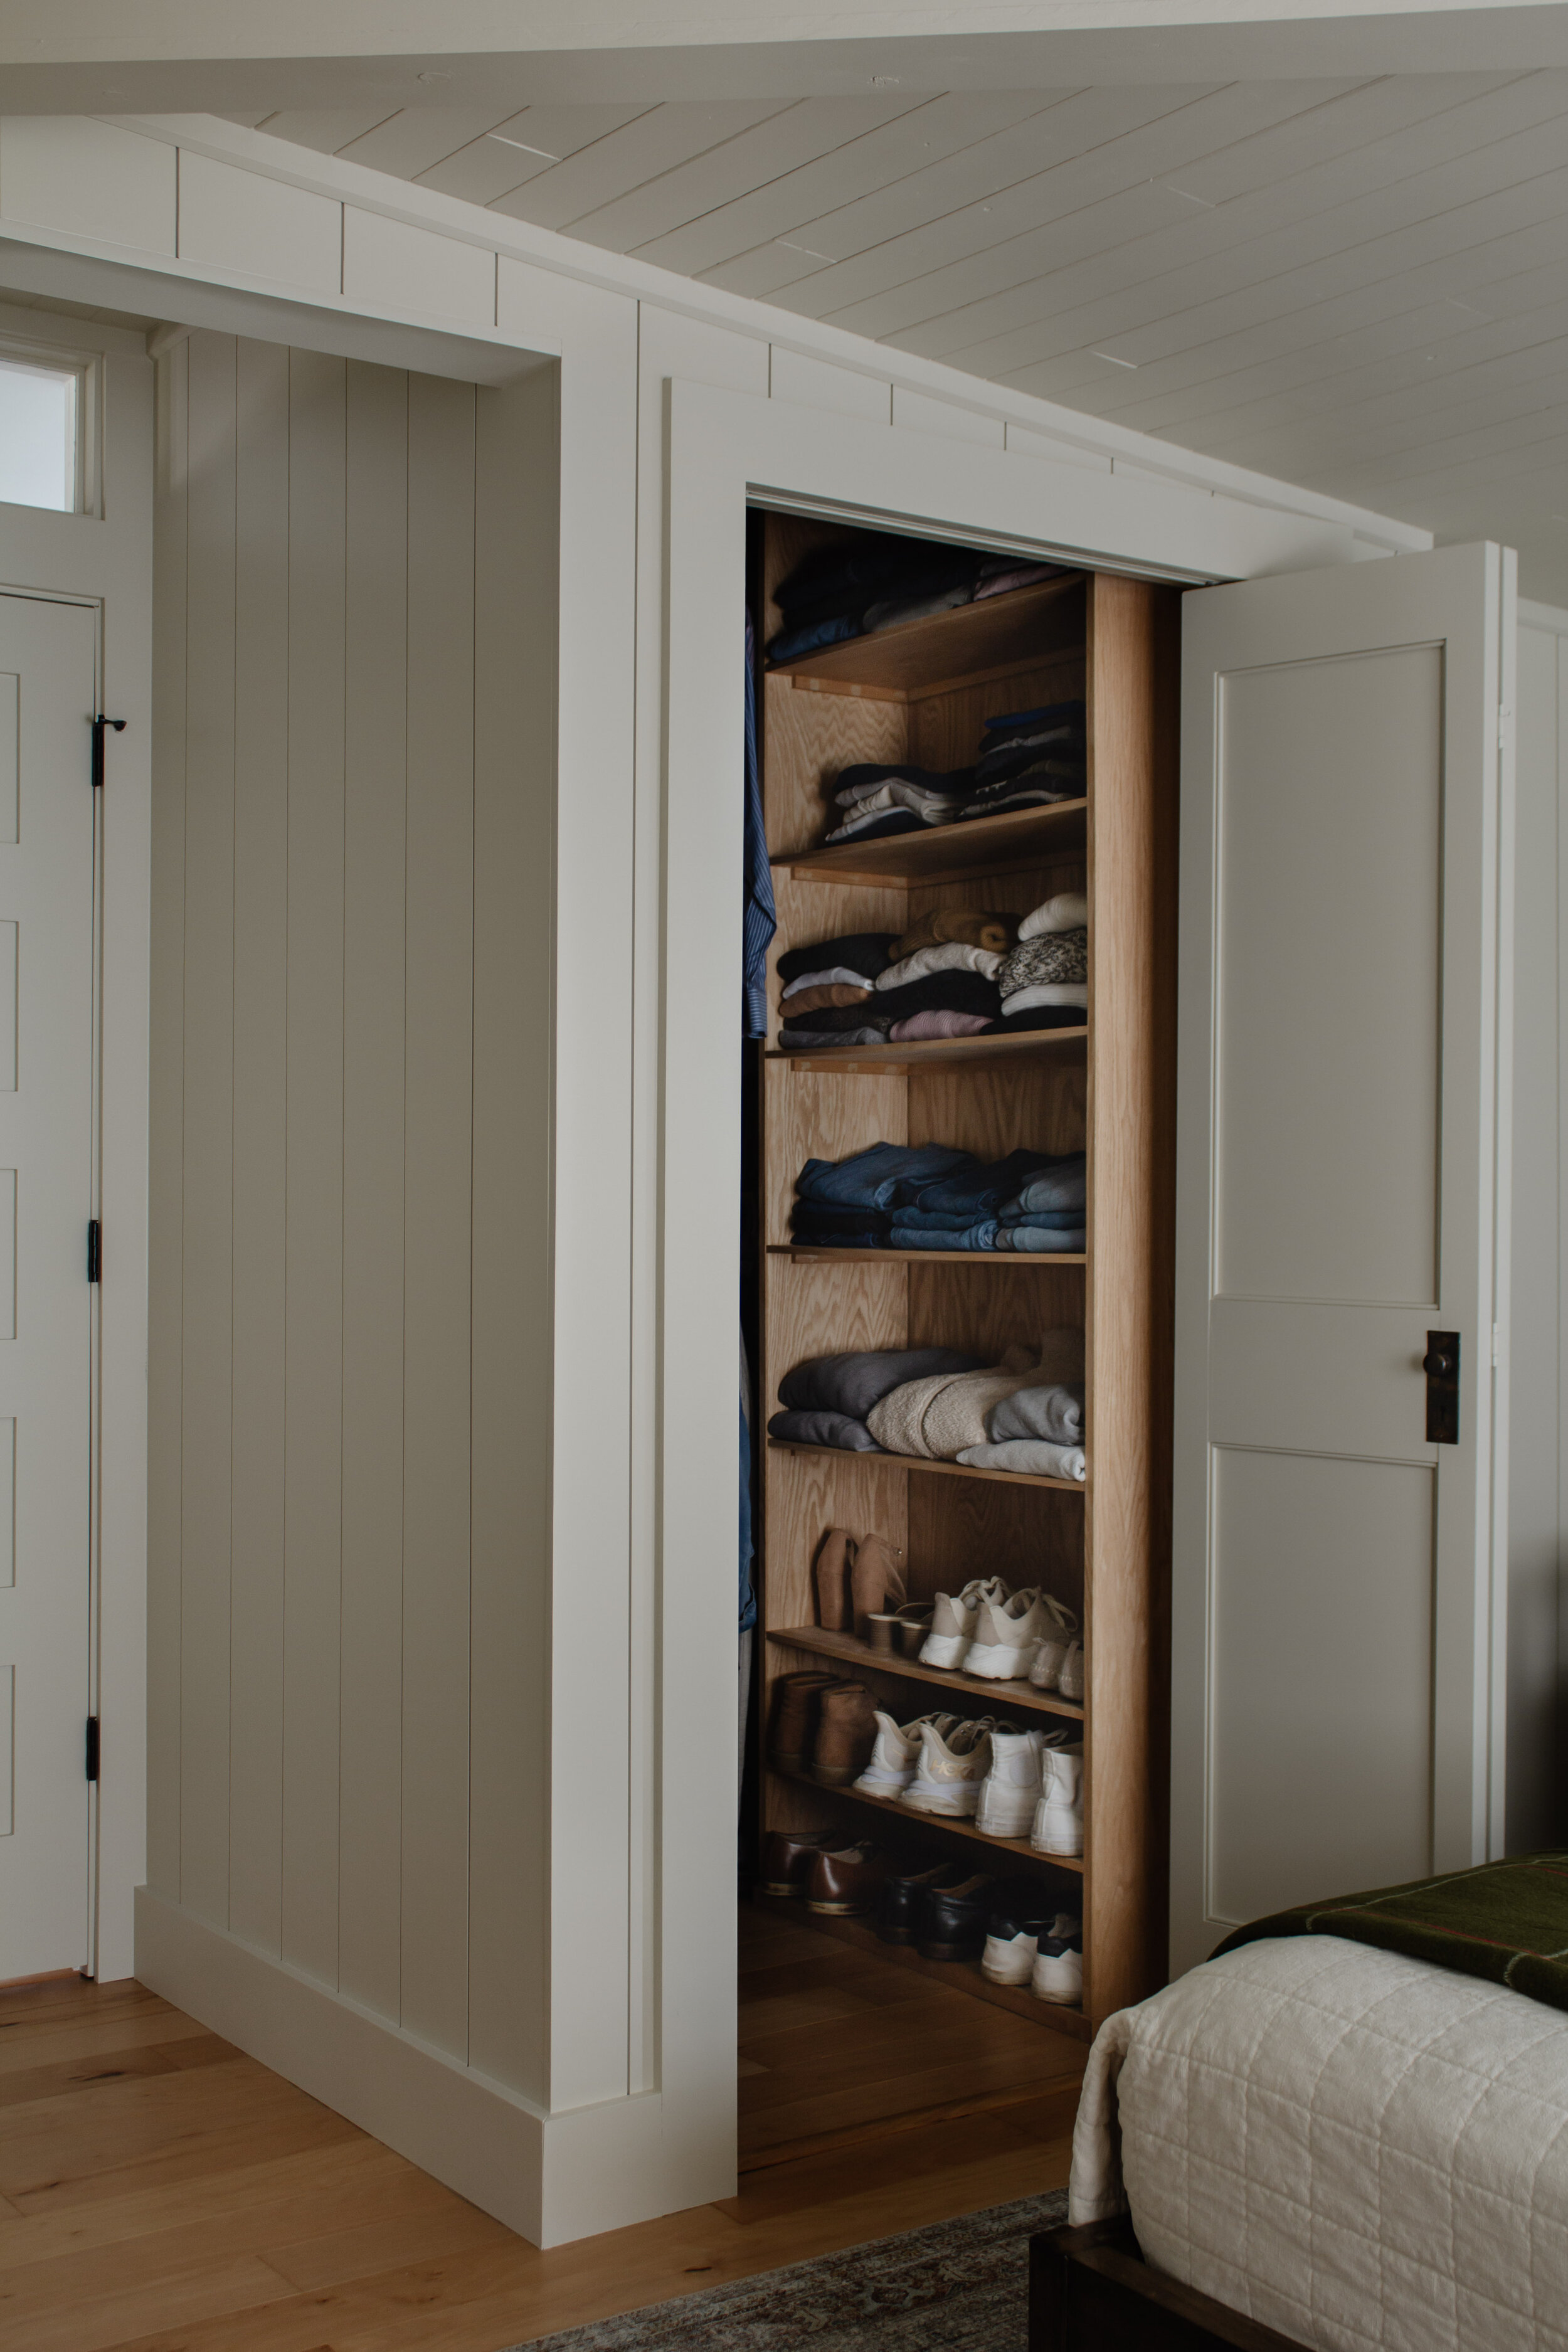 How we customized our standard bifold doors to look like high end double doors for less than $25. How to DIY and customize a single panel door with antique handles and knobs. Bedroom closet door inspiration. | Nadine Stay